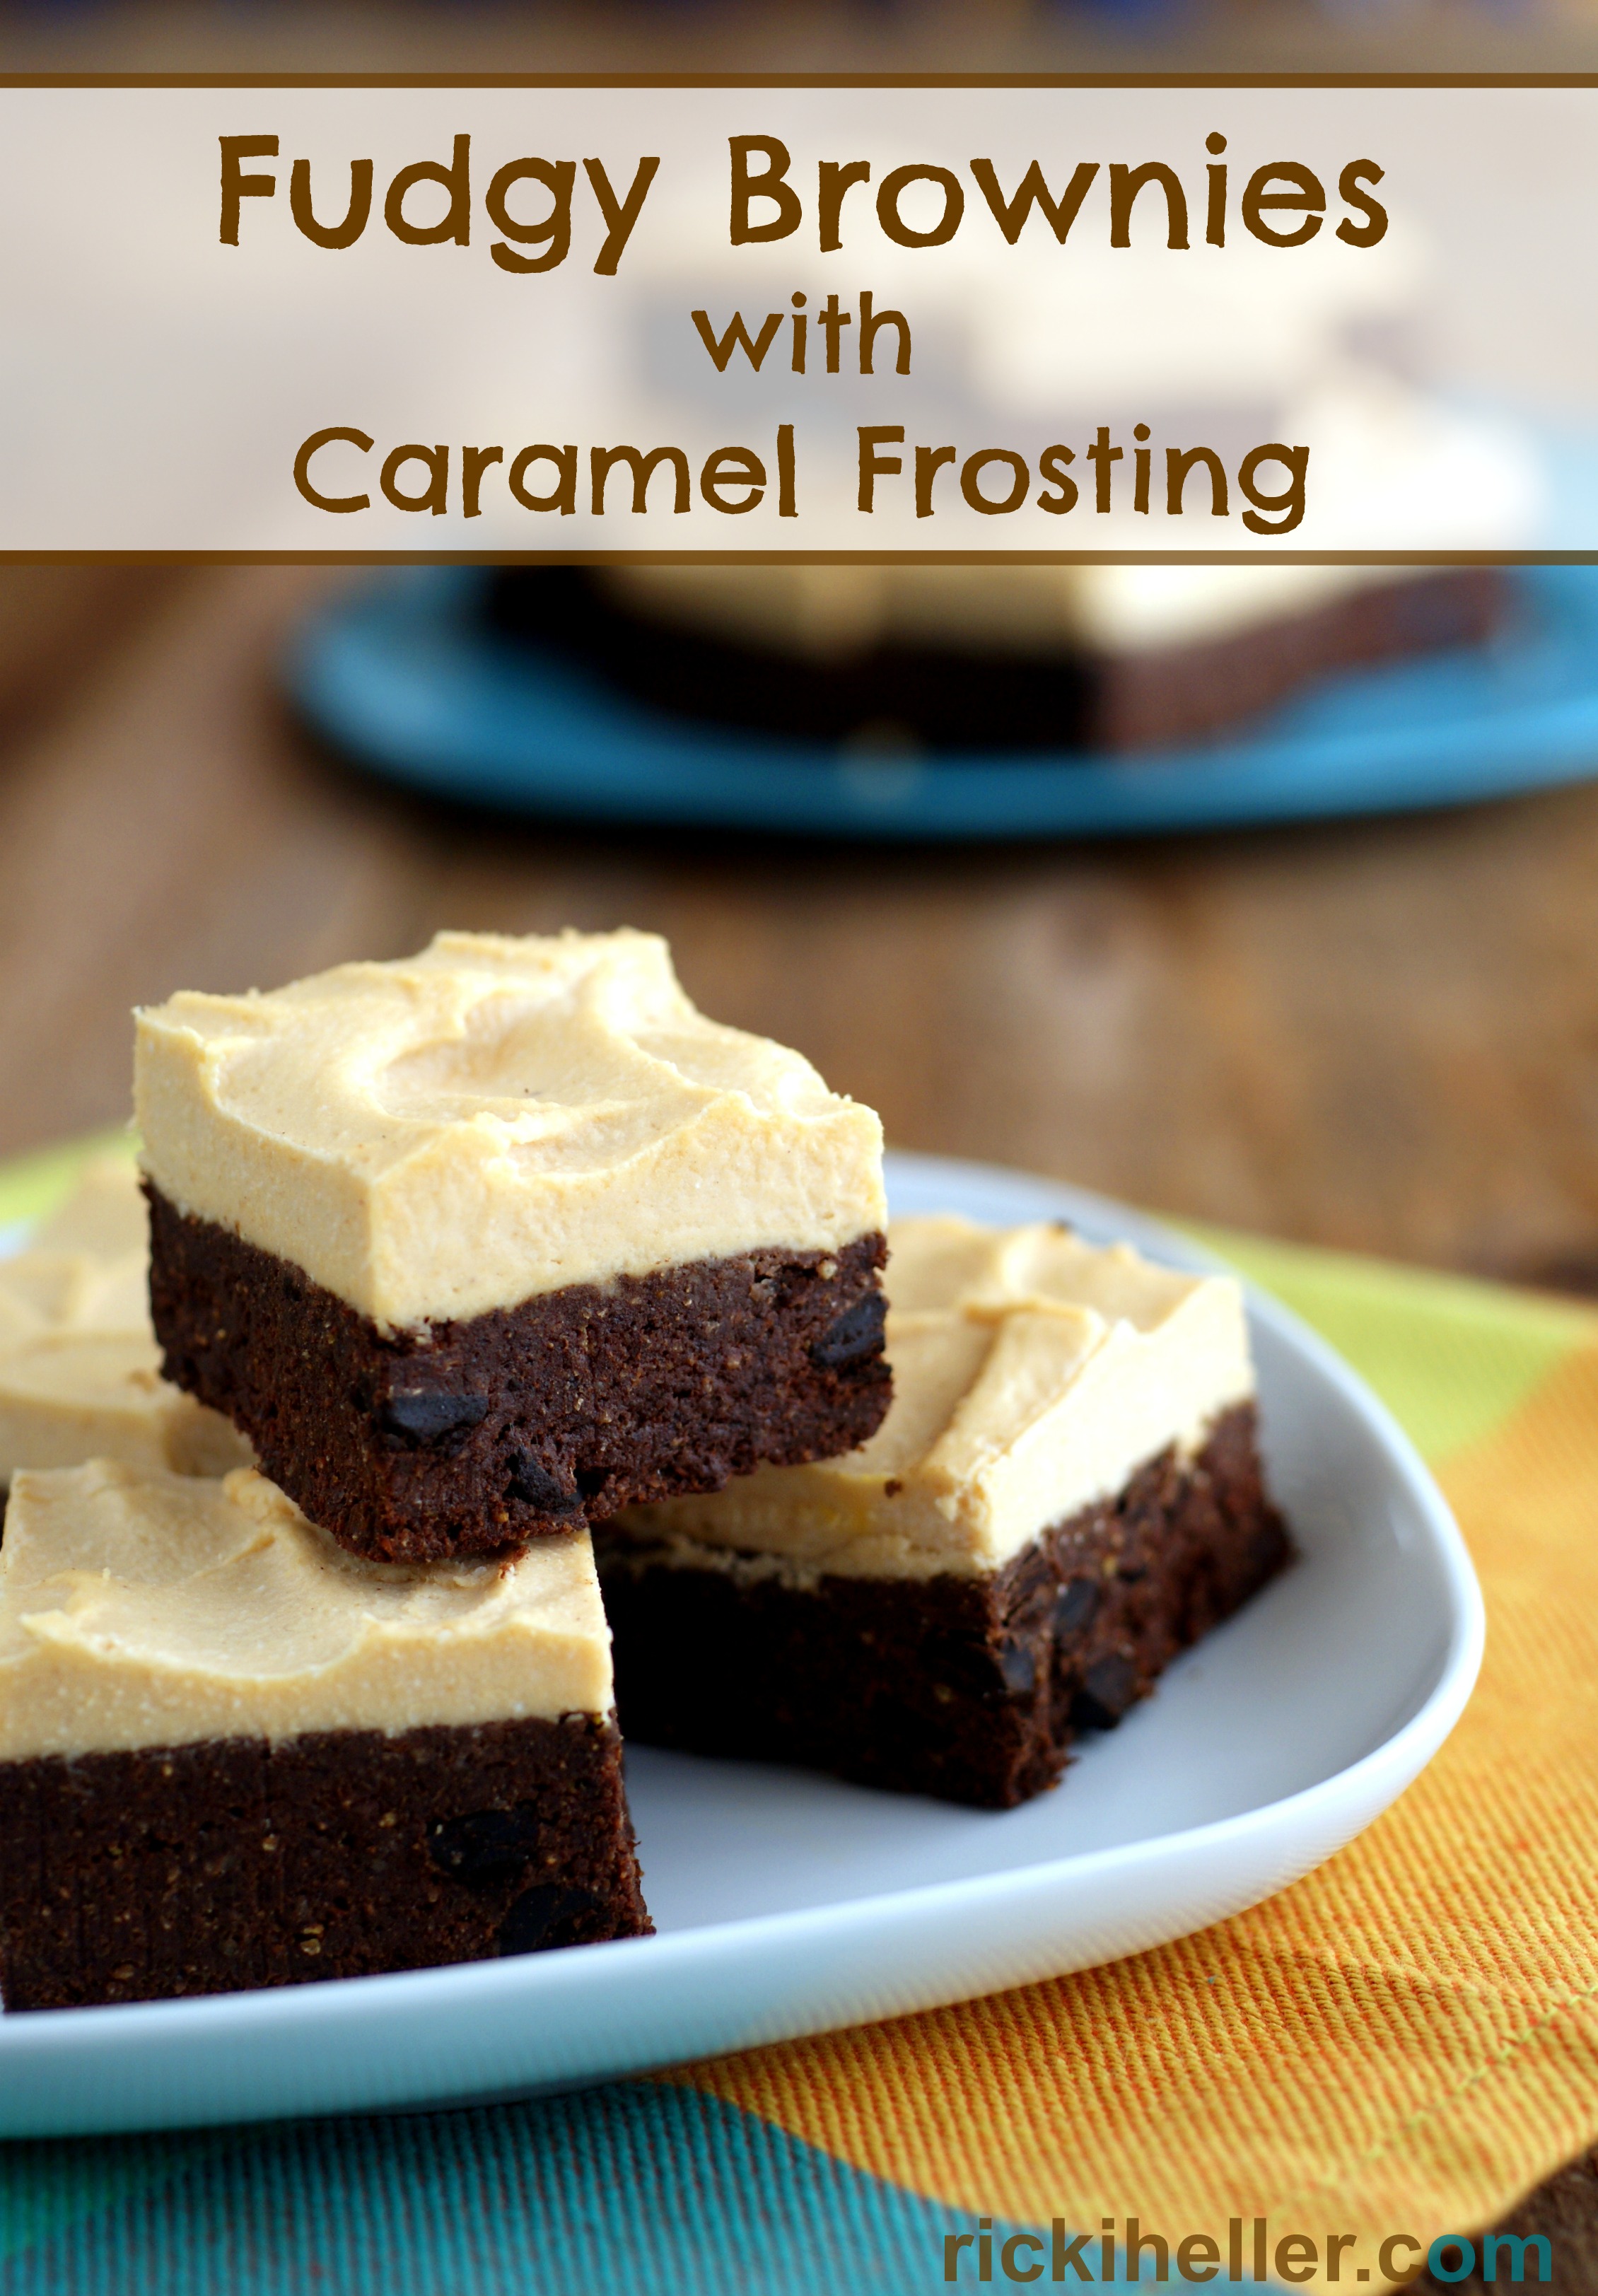 Candida diet, sugar-free, grain free fudgy brownies with caramel frosting